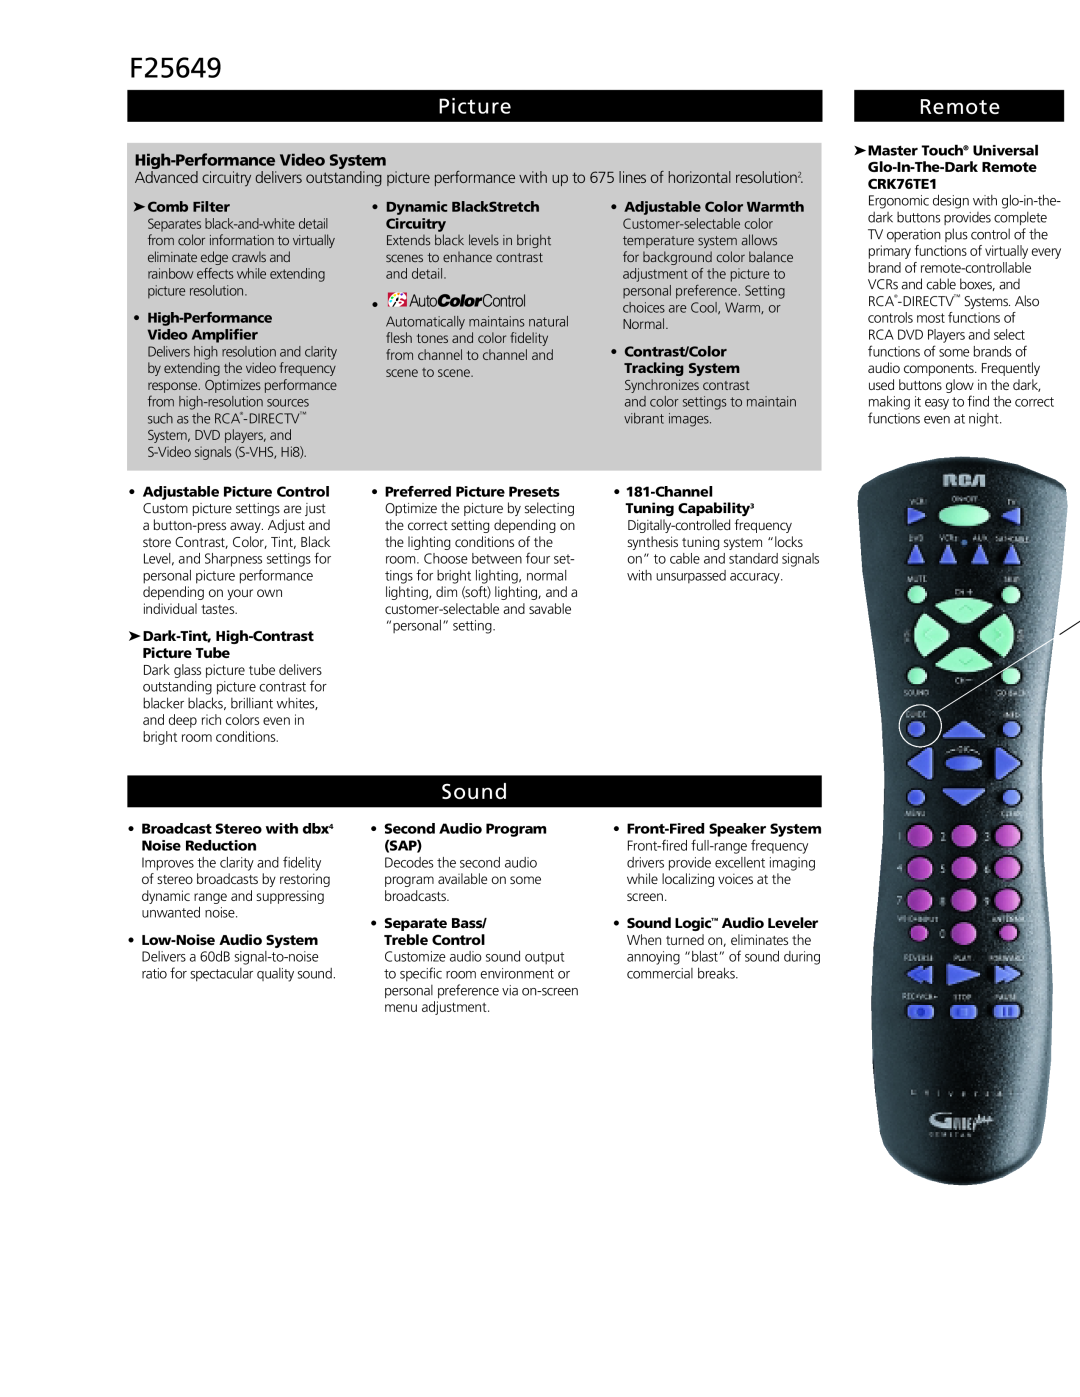 RCA F25649 manual Picture, Remote, Sound, High-Performance Video System 